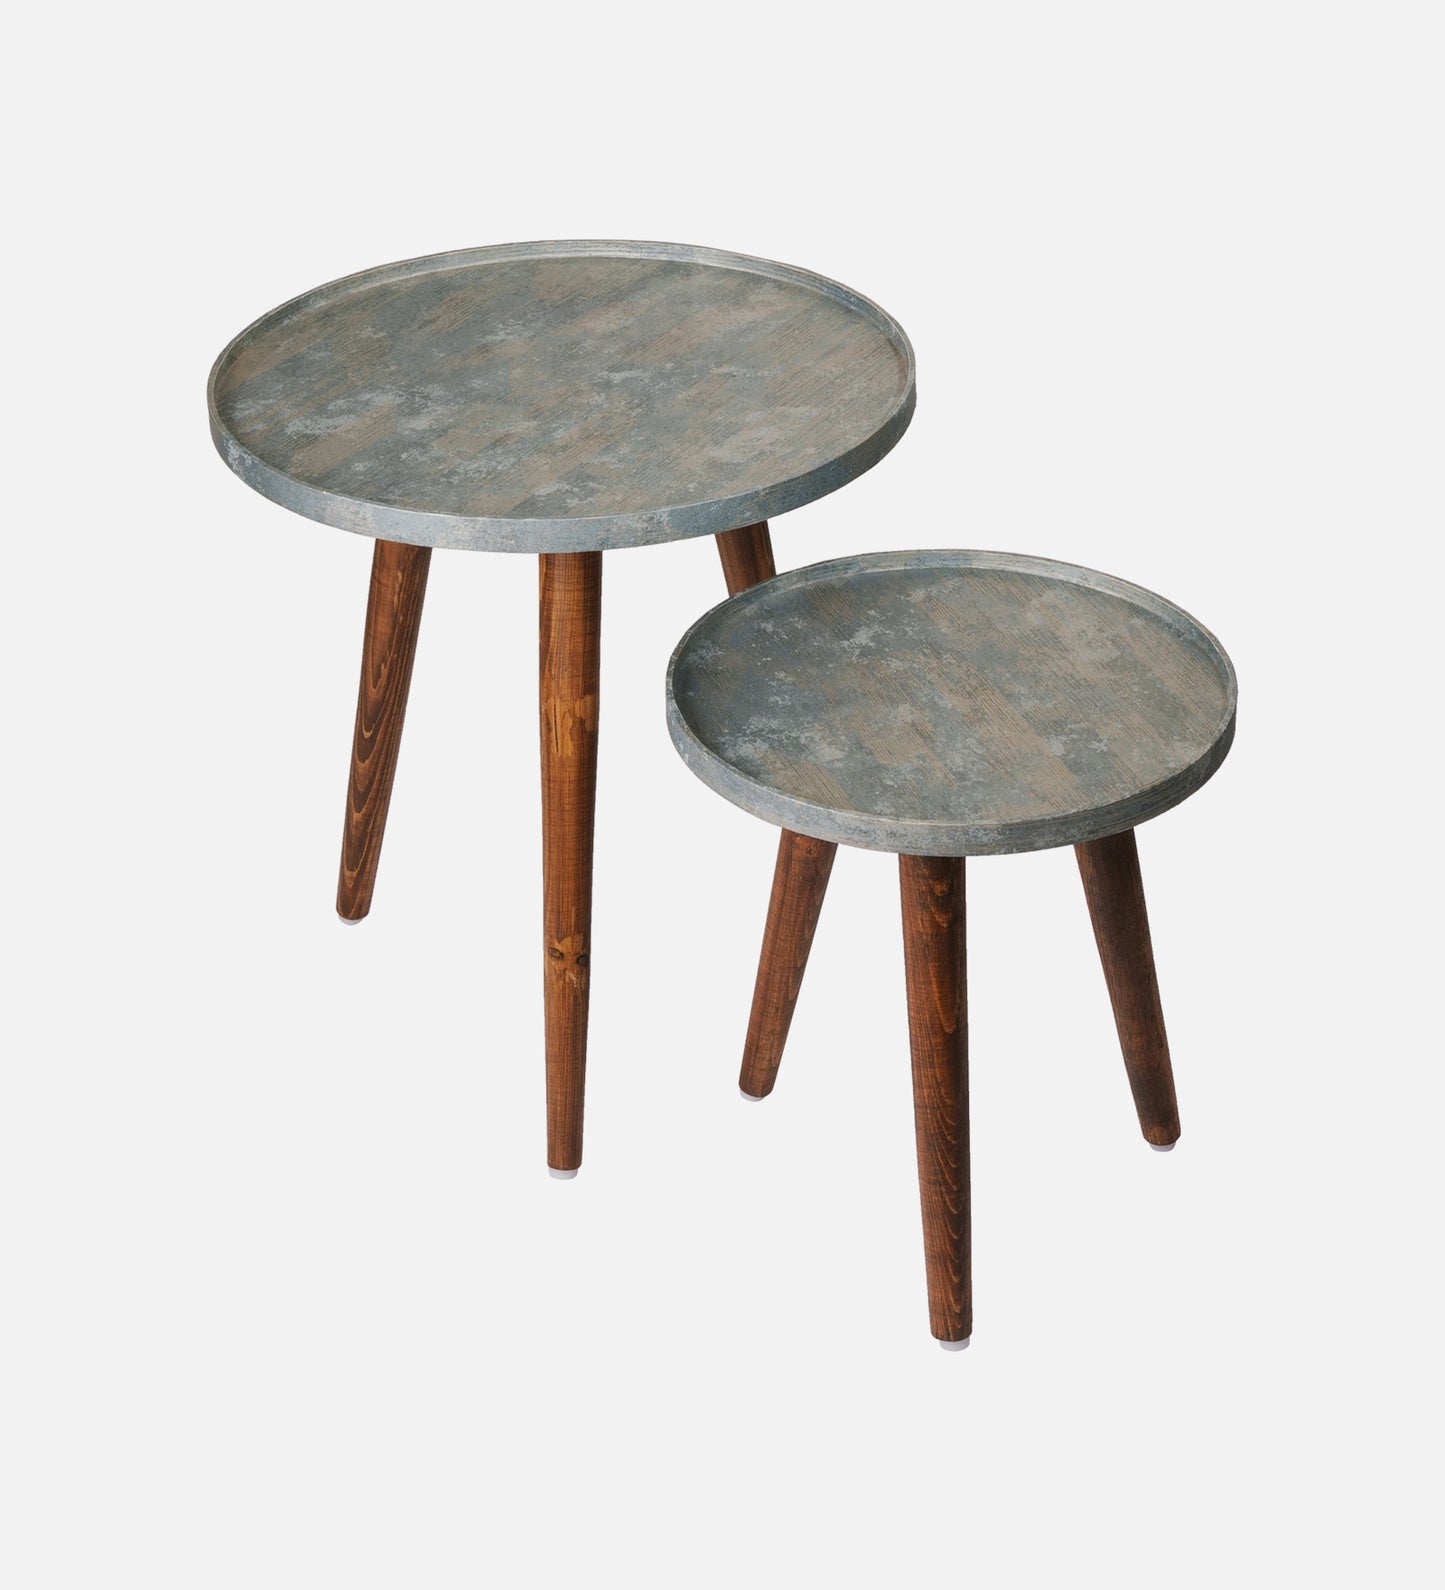 Teal Rain Round Nesting Tables with Wooden Legs, Side Tables, Wooden Tables, Living Room Decor by A Tiny Mistake